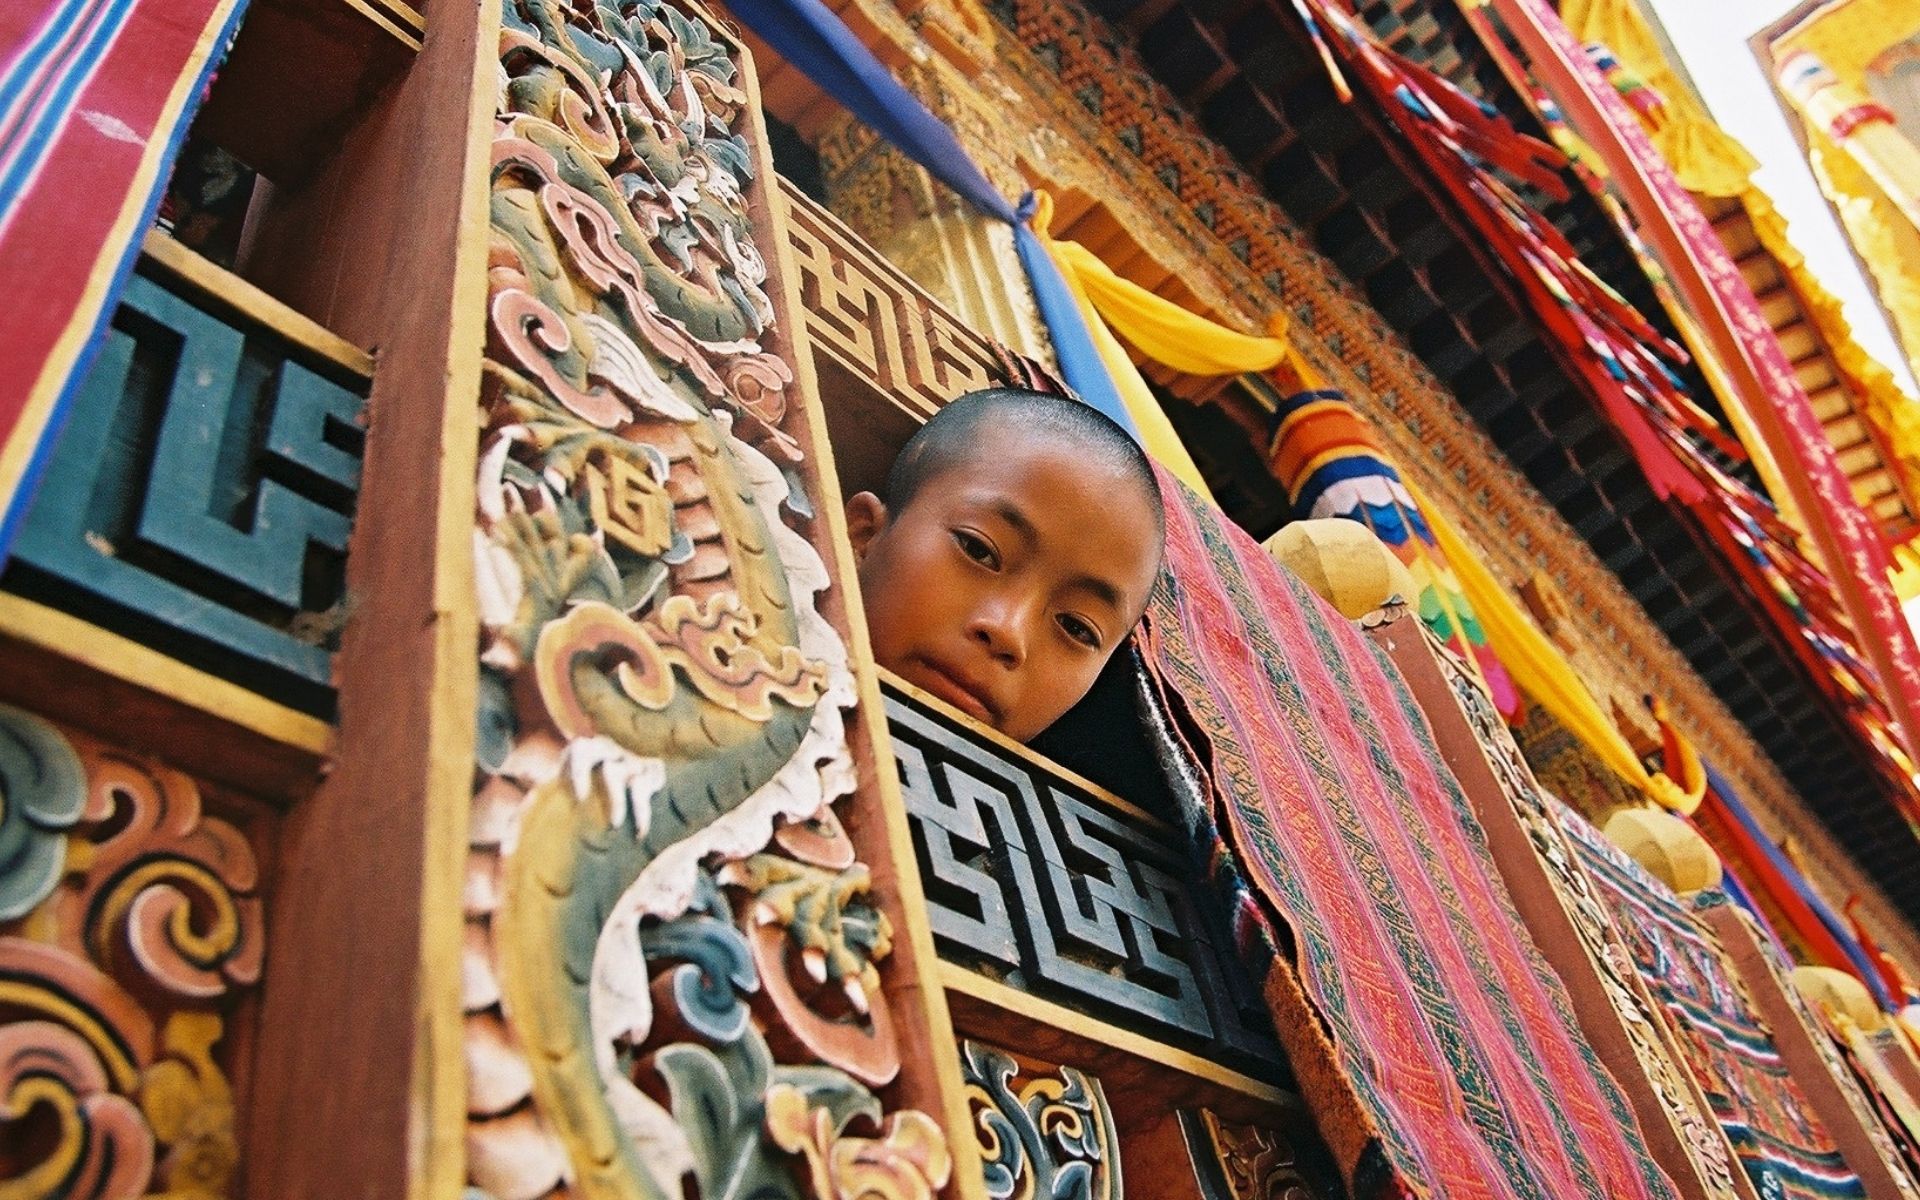 Young monk at Punakha Dhong 2003 from filming of Story of an English Stupa photo by Judi Alston